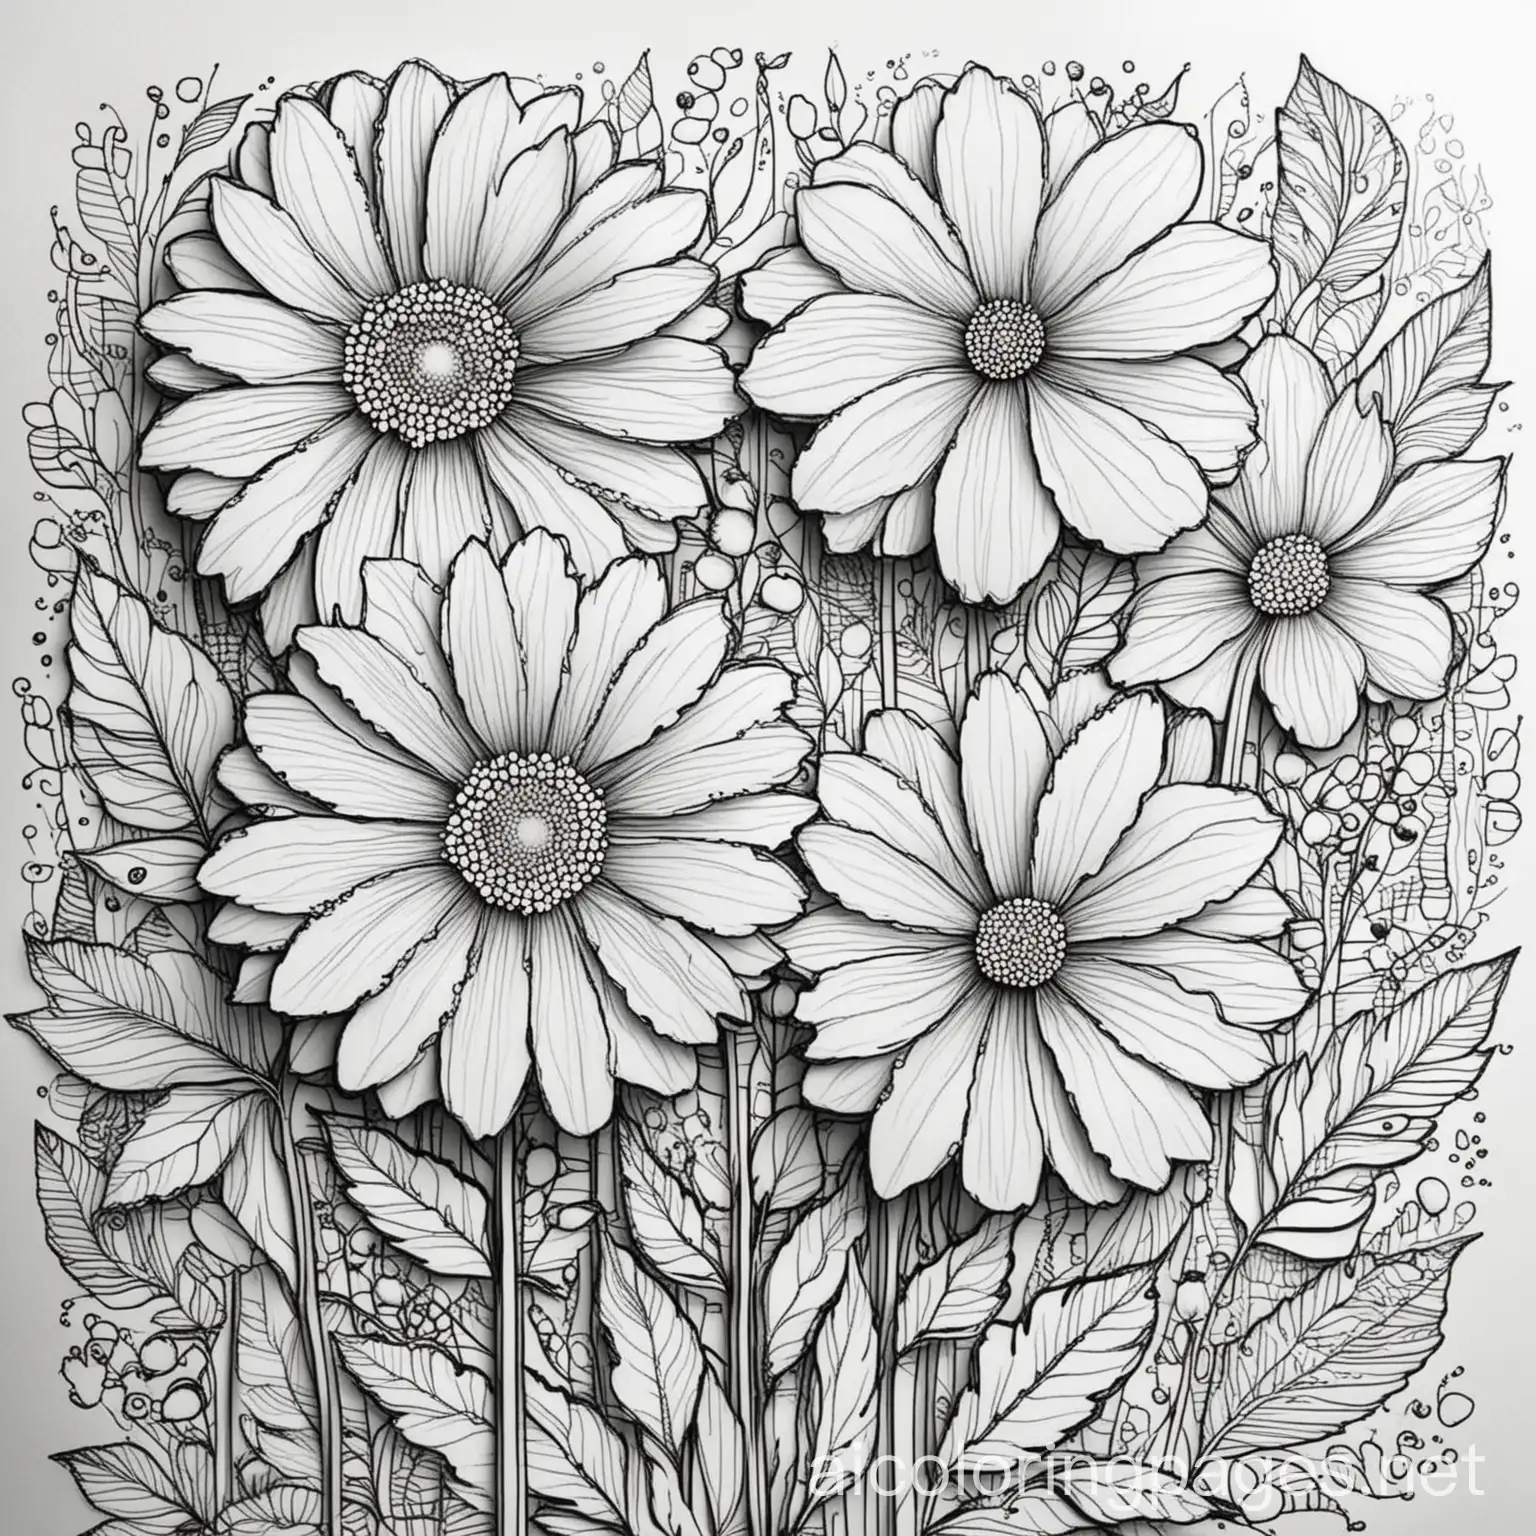 florals, thick lines, abstract flowers, Coloring Page, black and white, line art, white background, Simplicity, Ample White Space. The background of the coloring page is plain white to make it easy for young children to color within the lines. The outlines of all the subjects are easy to distinguish, making it simple for kids to color without too much difficulty